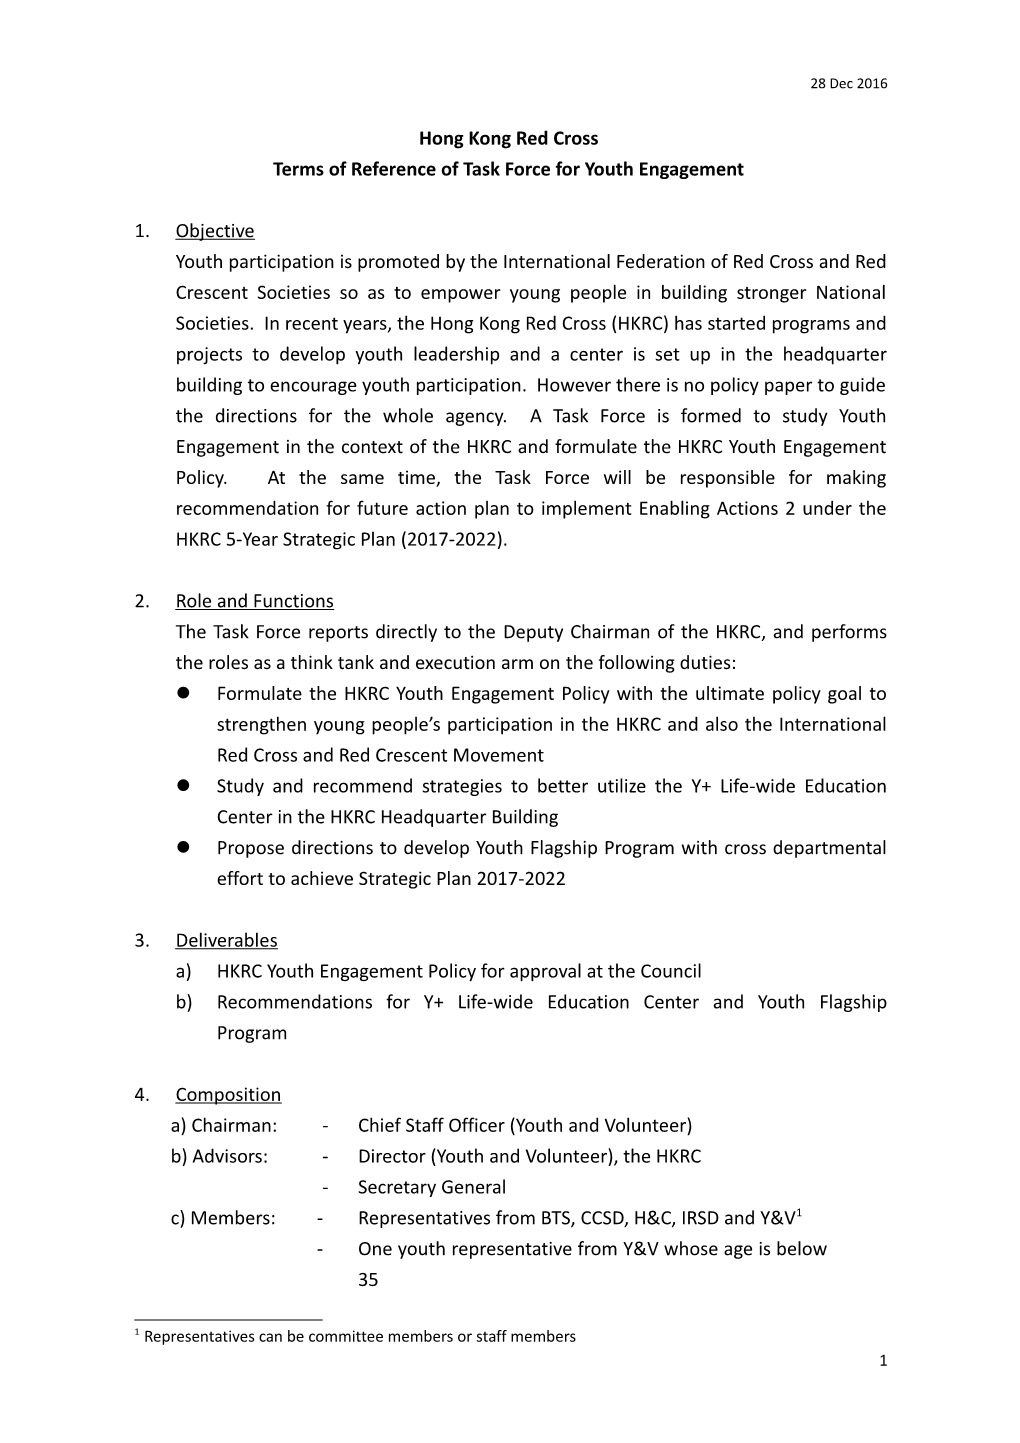 Terms of Reference of Task Force for Youth Engagement